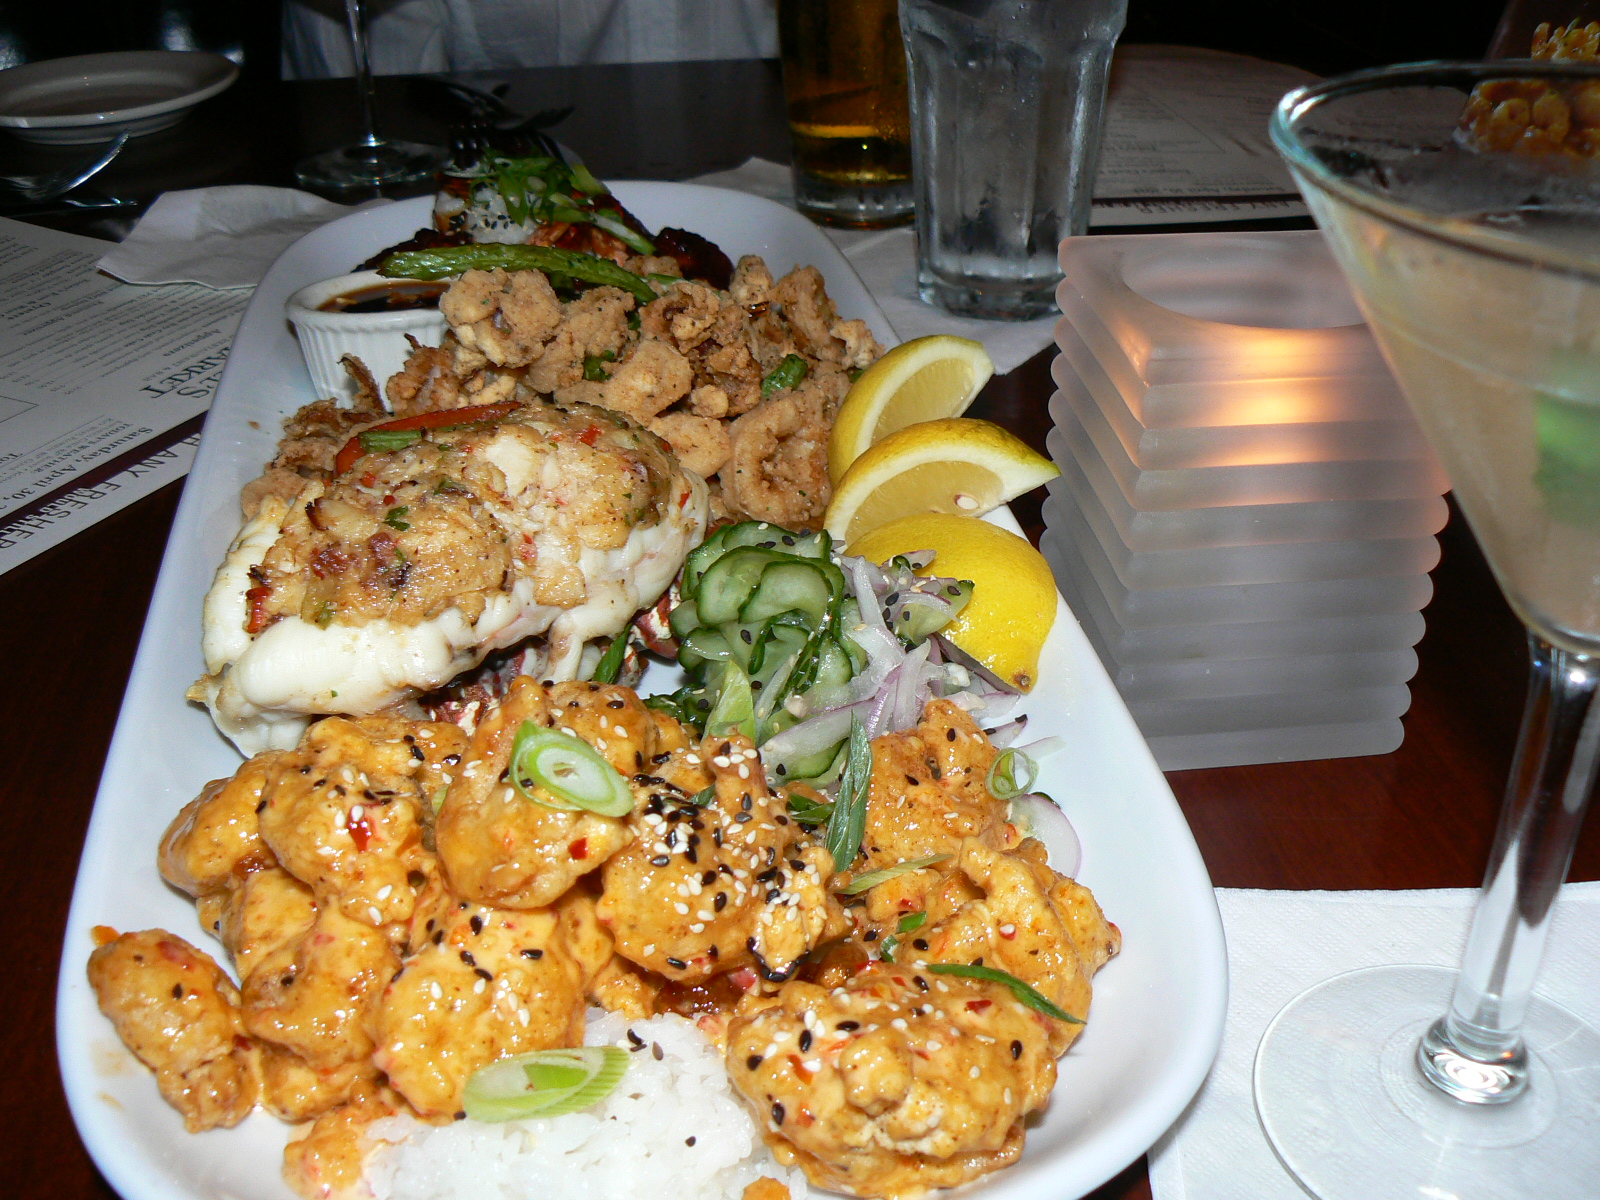 Flavorful Excursions: Dinner at Mitchell's Fish Market